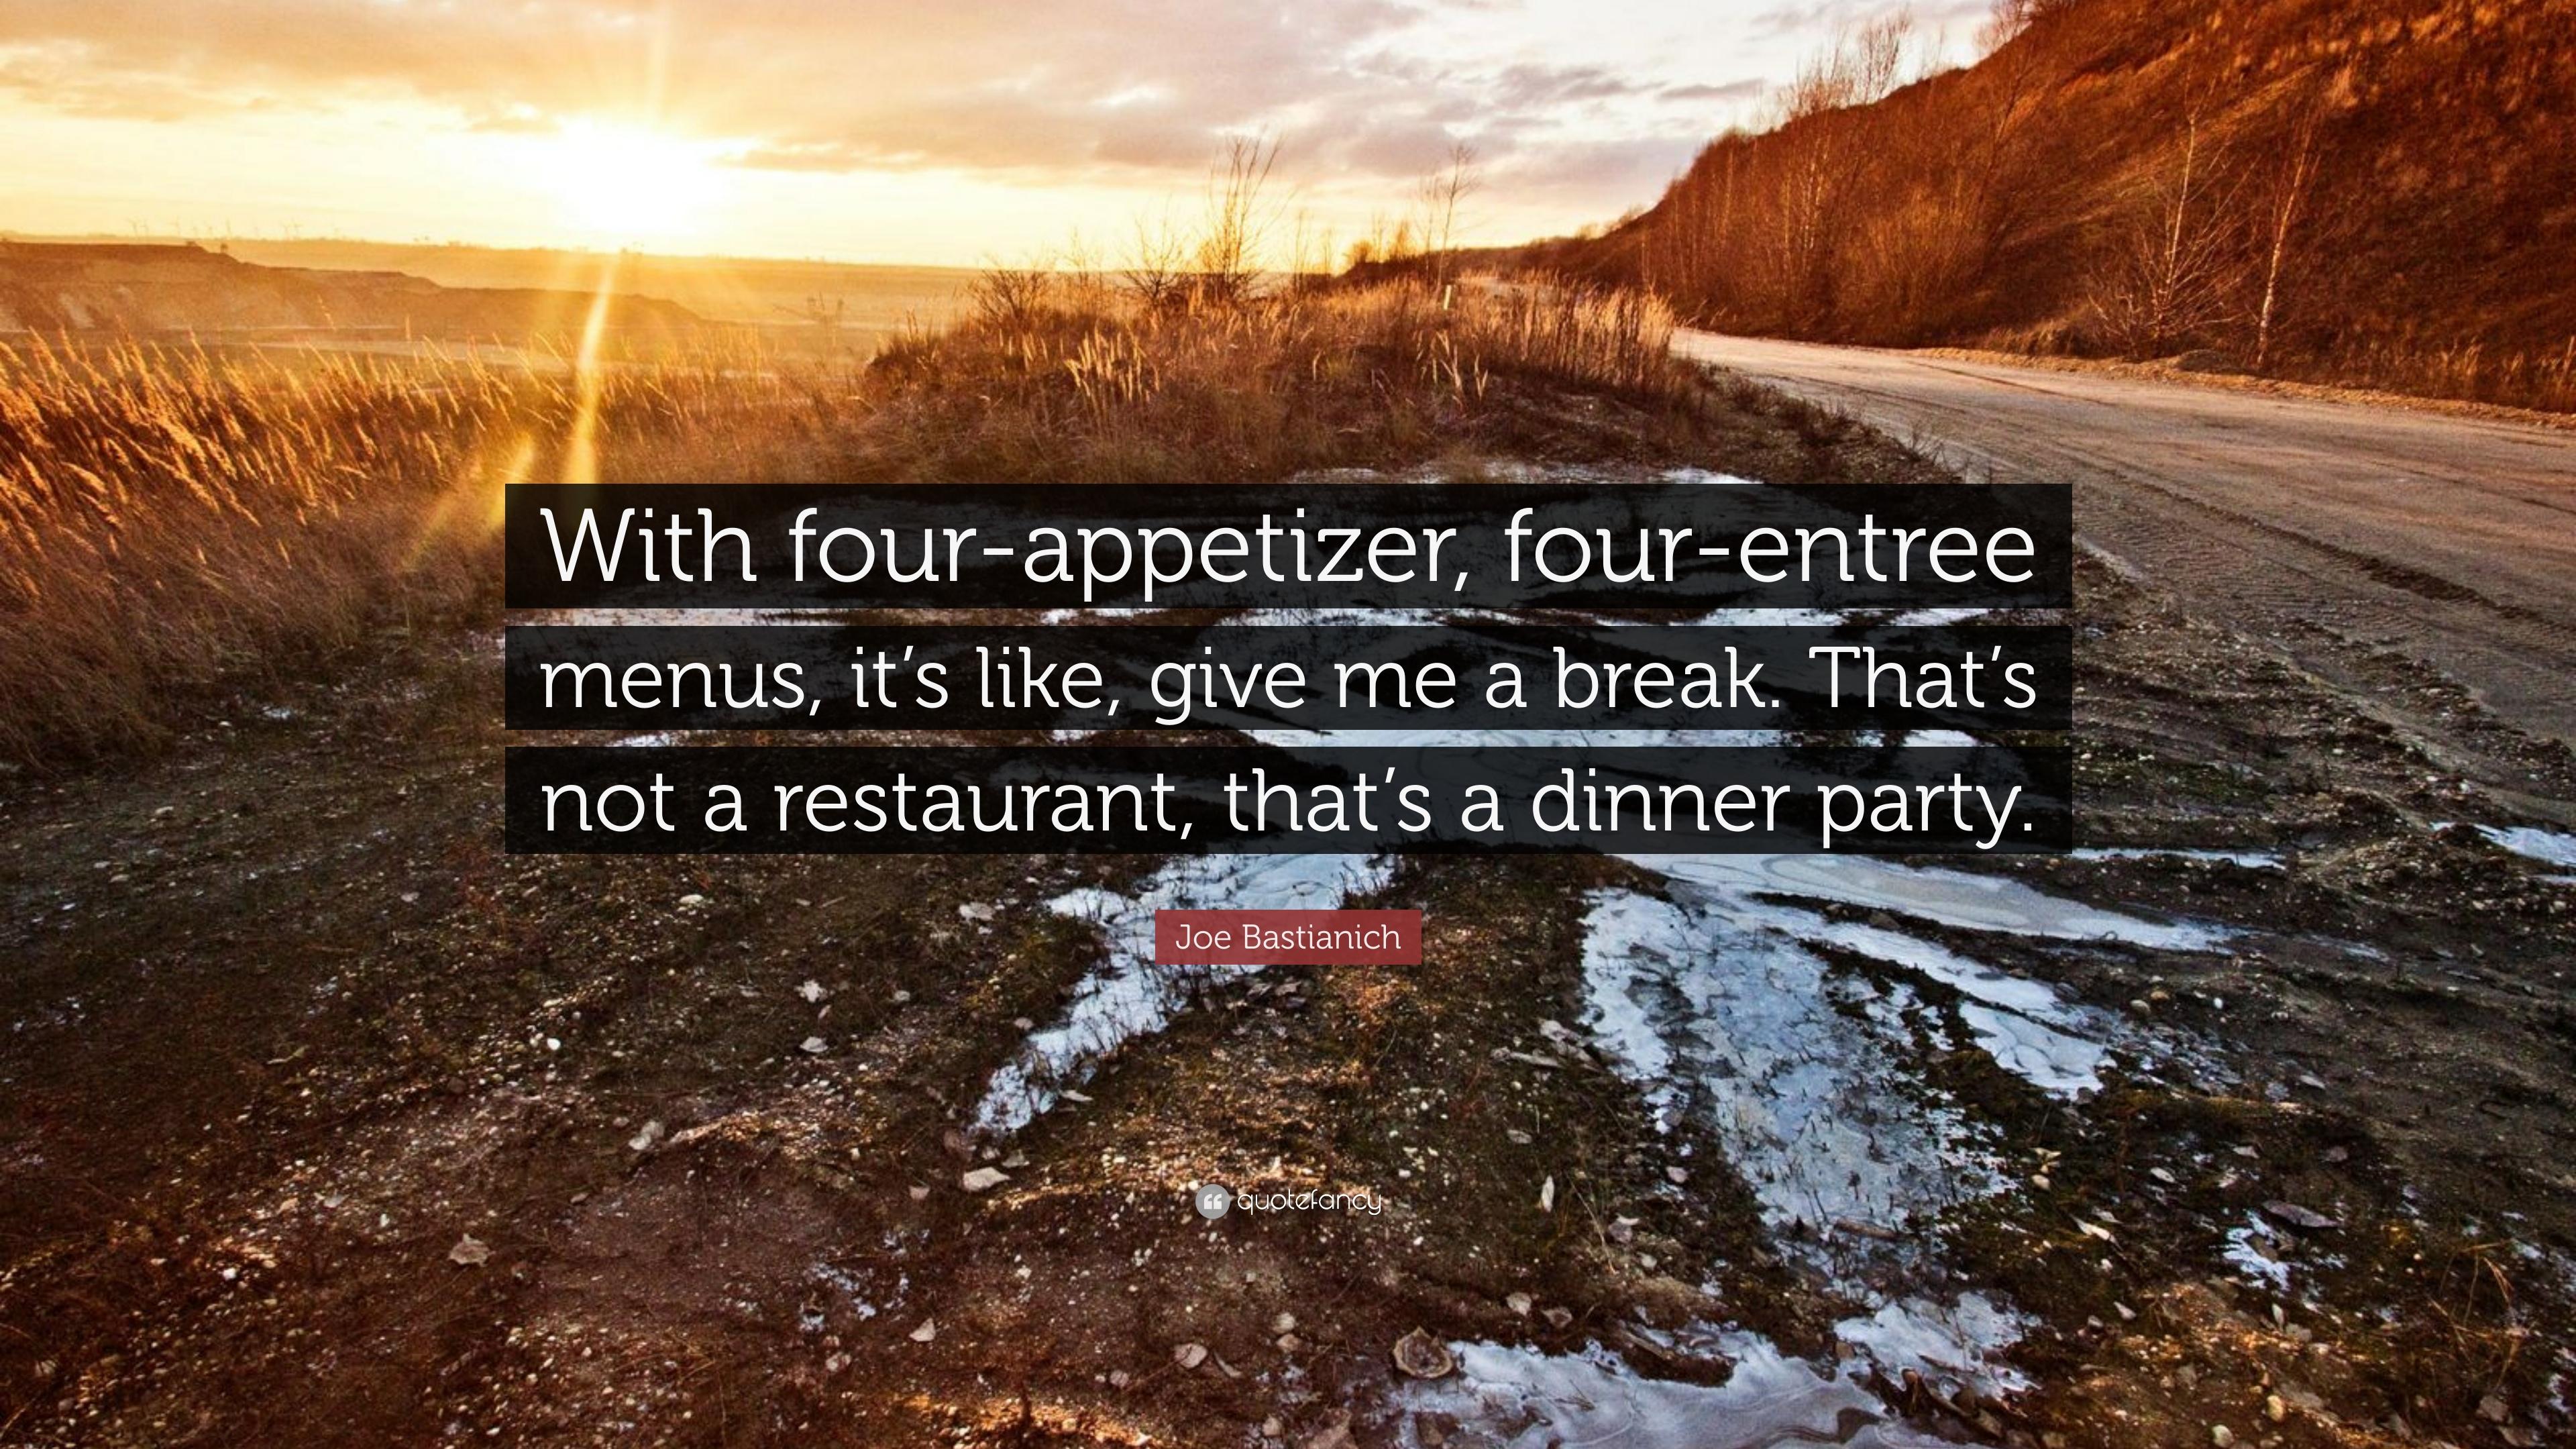 Joe Bastianich Quote: “With Four Appetizer, Four Entree